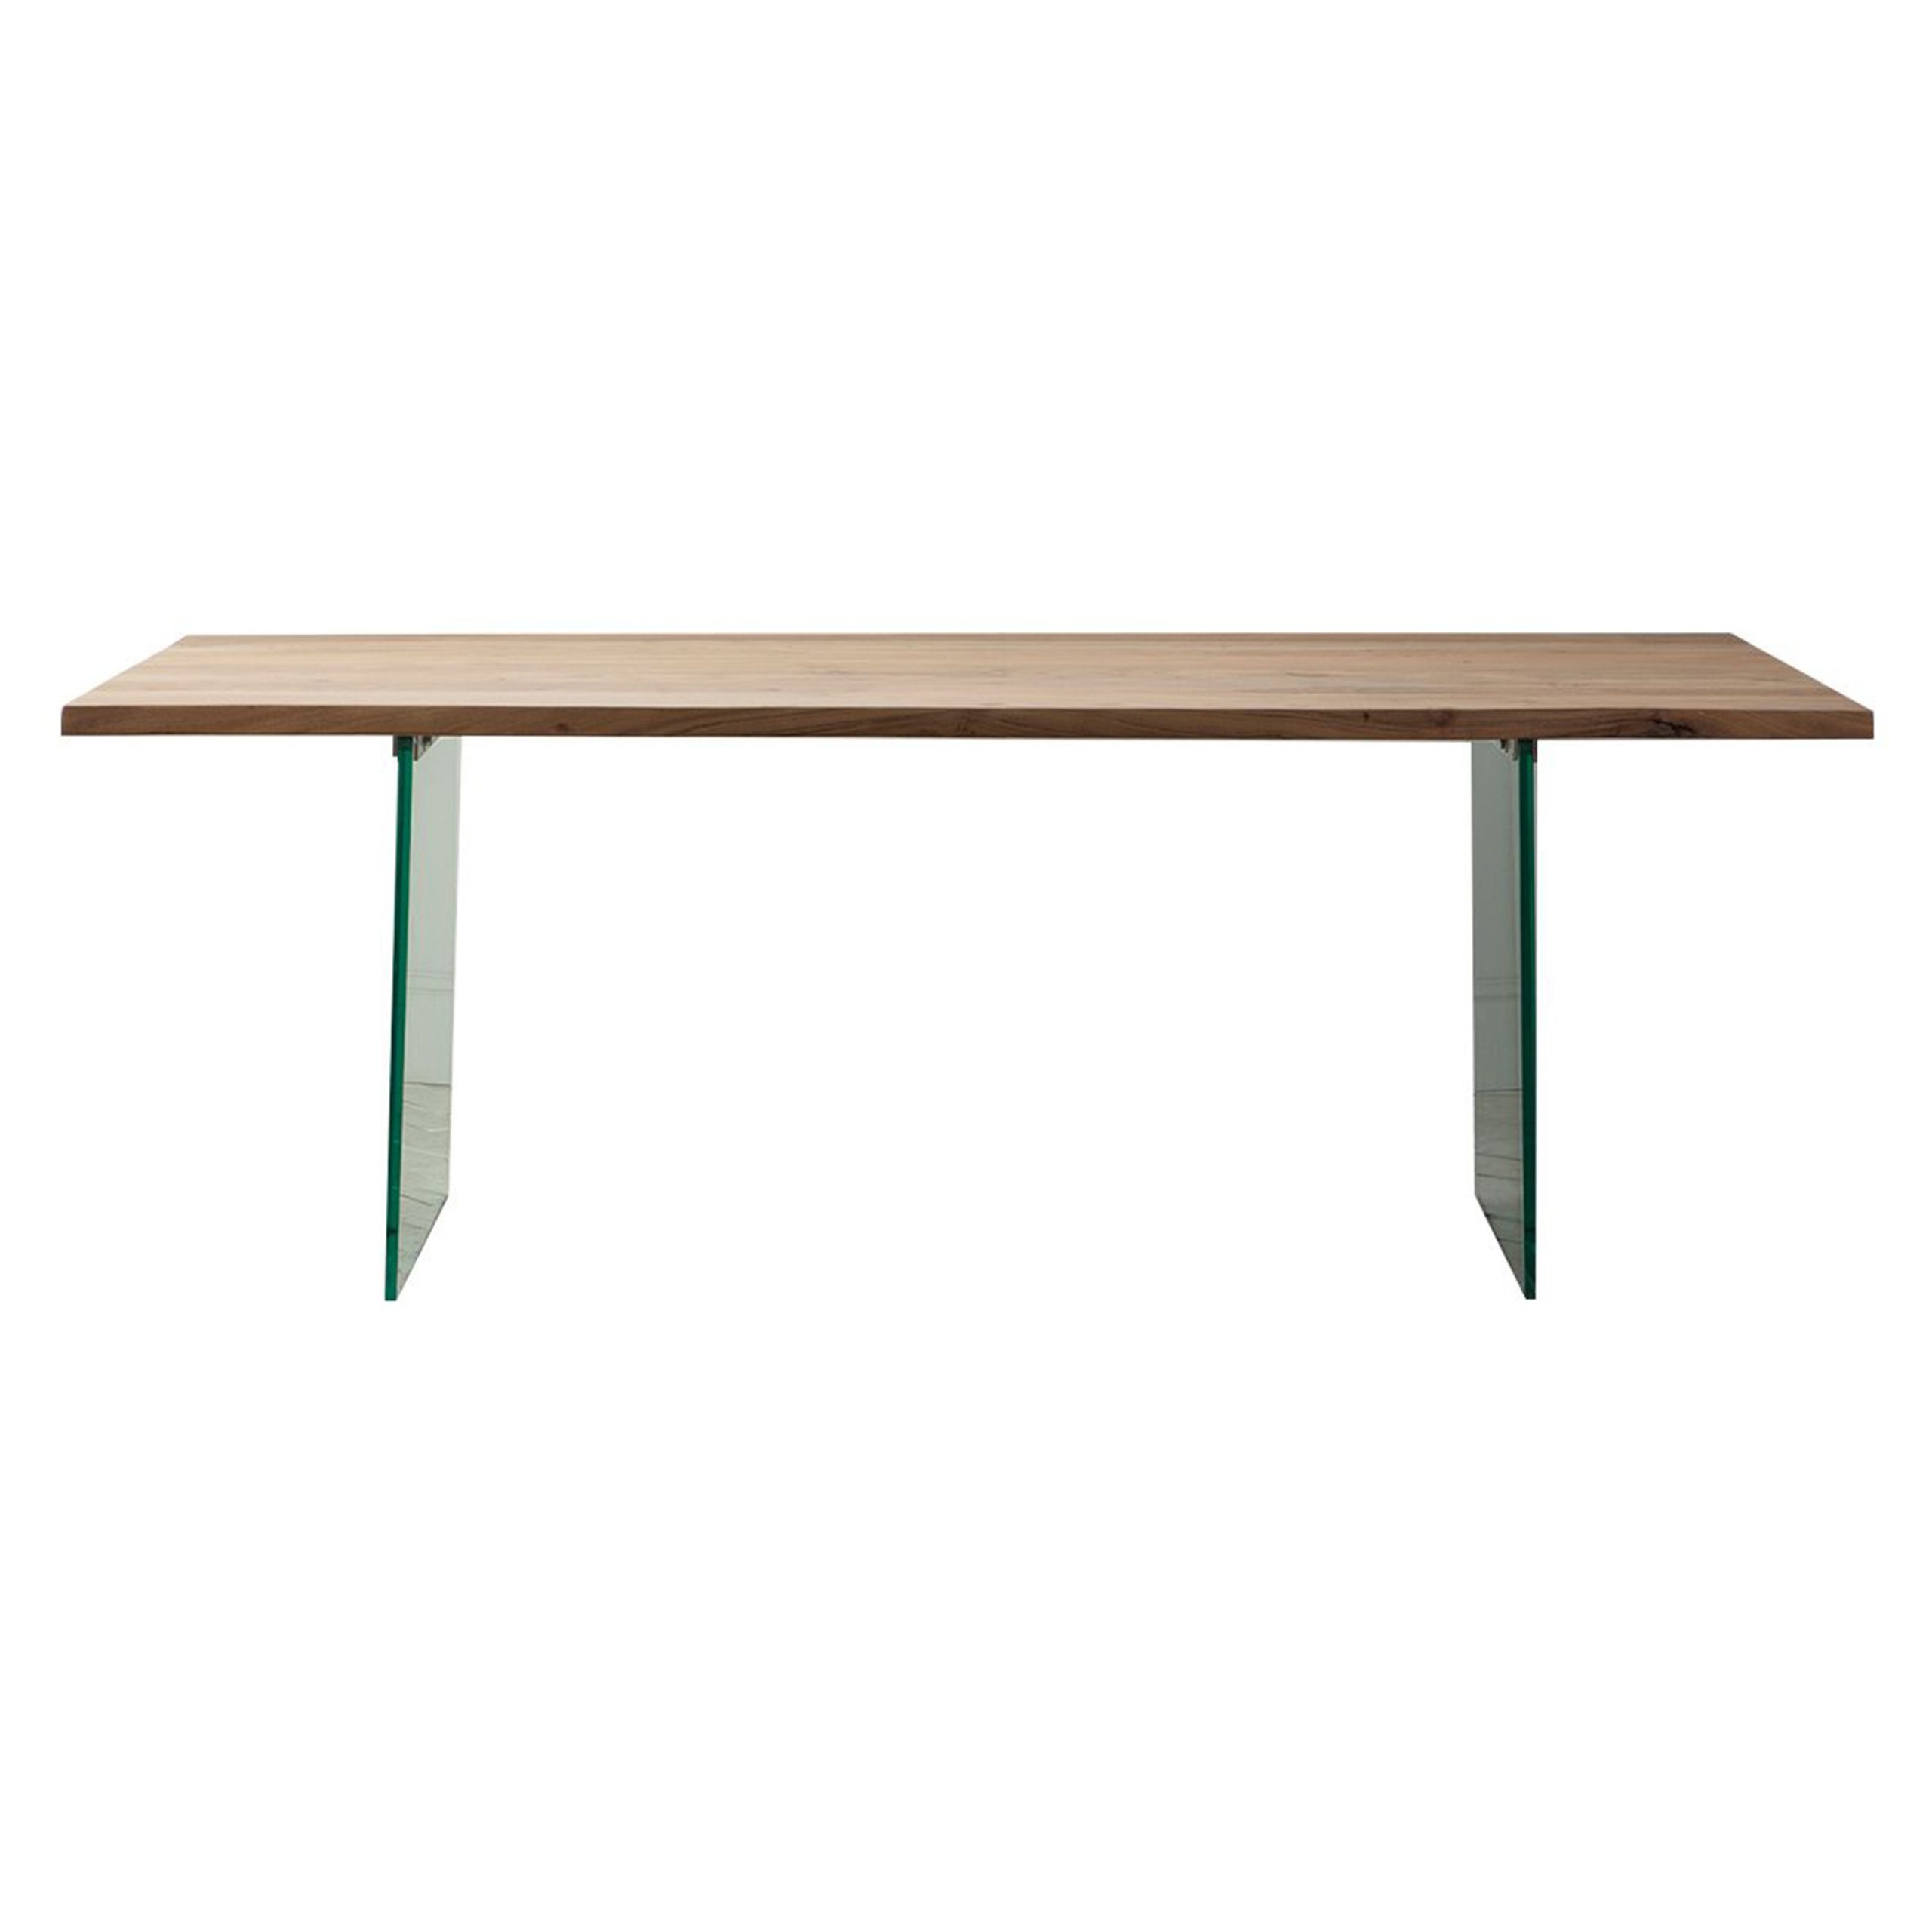 Gallery Direct Ferndaleale Dining Table